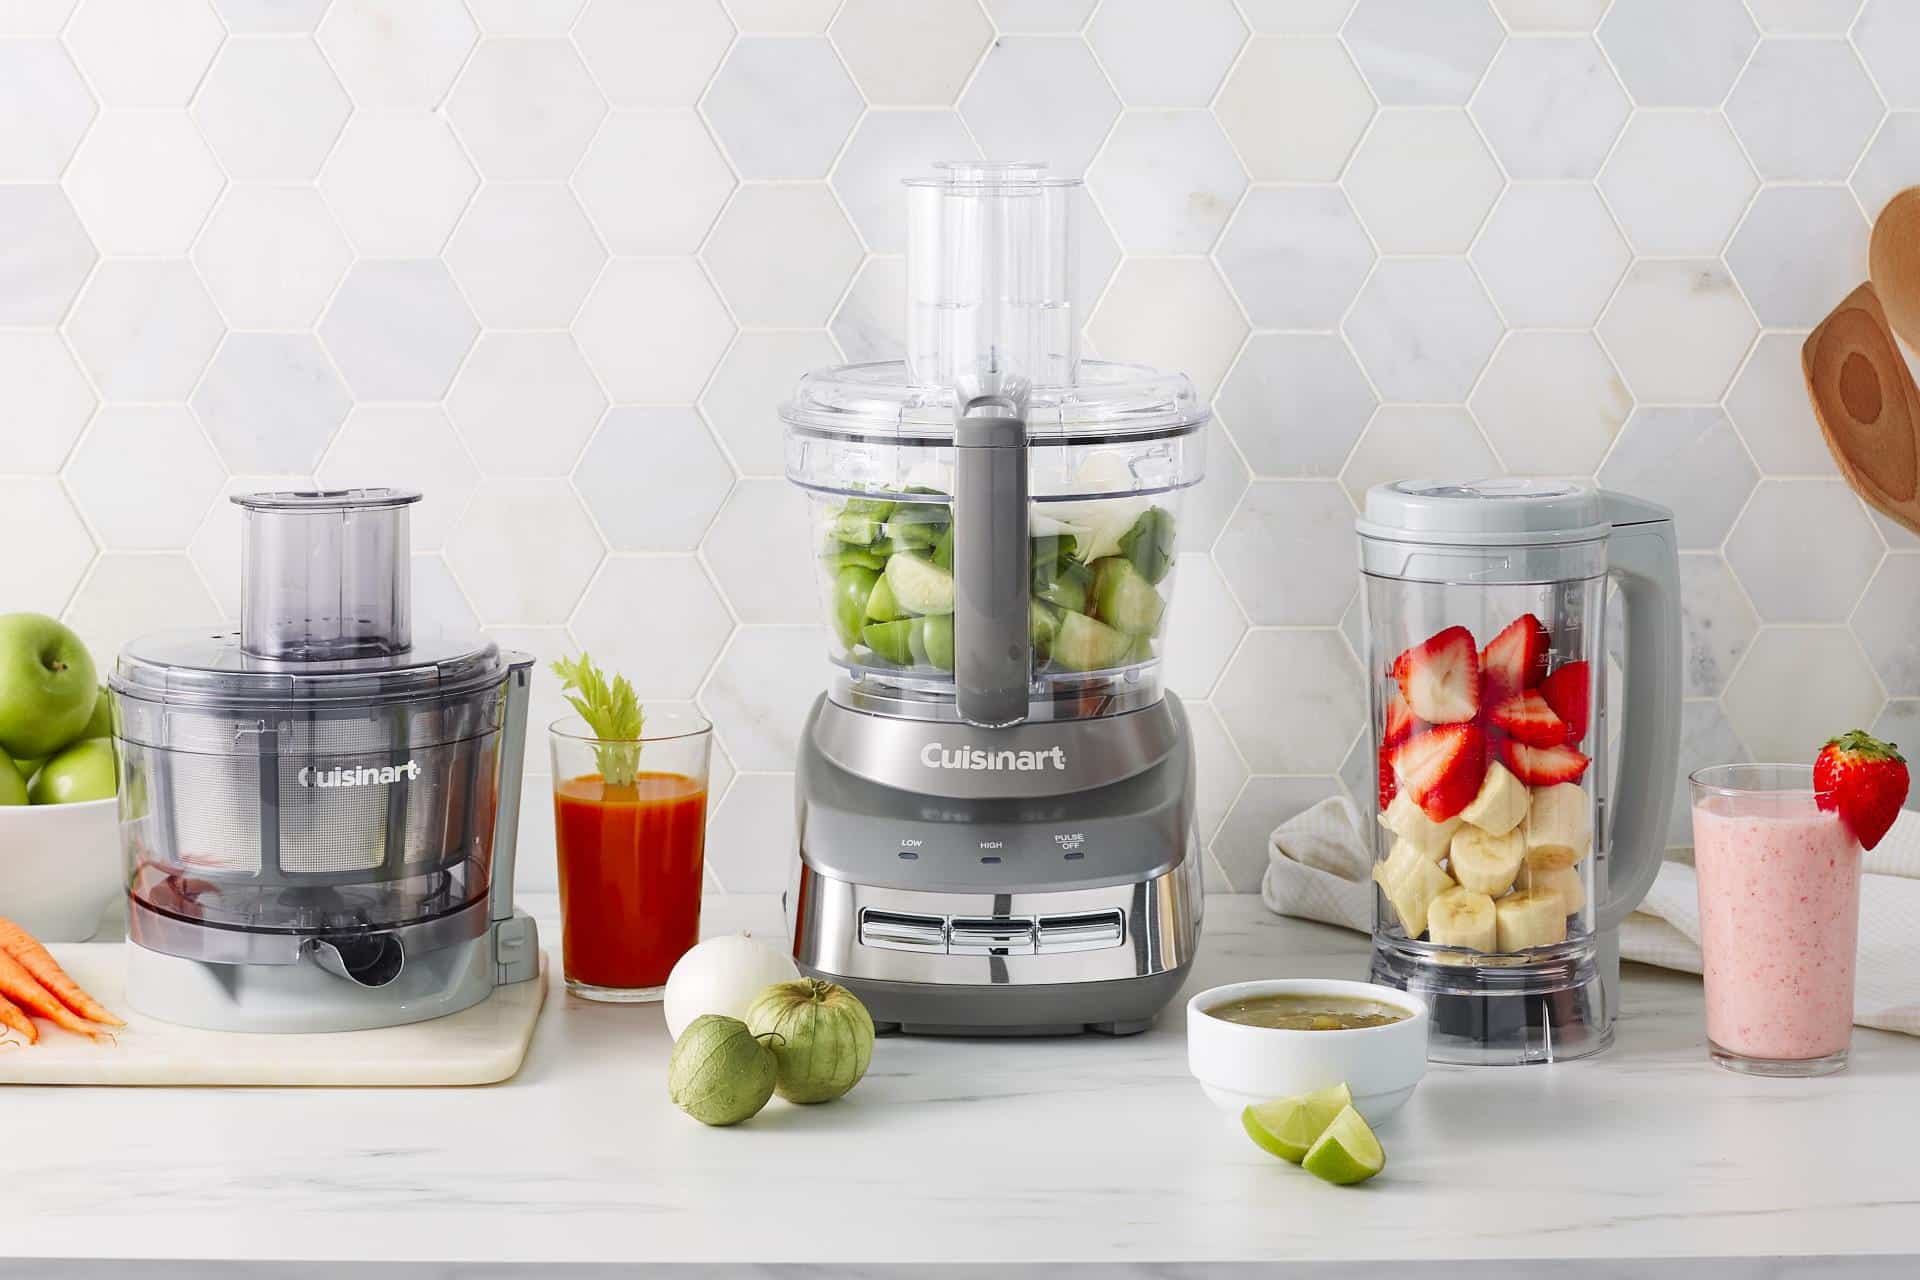 What’s The Difference Between A Food Processor And A Blender?